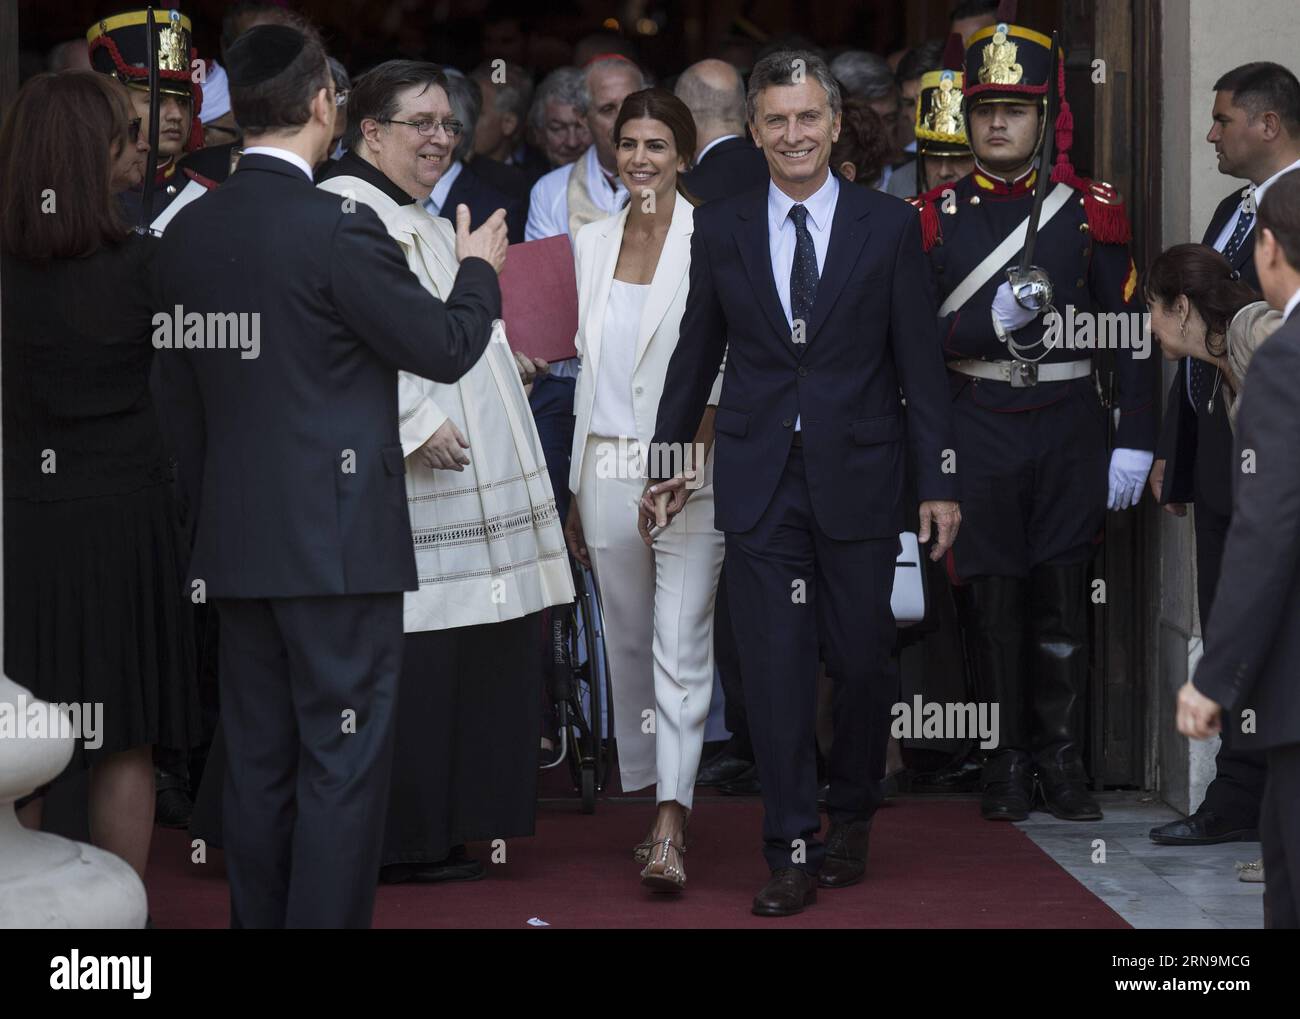 (151211) -- BUENOS AIRES, Dec. 11, 2015 -- Argentina s President Mauricio Macri (R) leaves with First Lady Juliana Awada (L) after taking part in the Tedeum at the Metropolitan Cathedral in Buenos Aires, capital of Argentina, Dec. 11, 2015. According to local press, Mauricio Macri attended Friday with Argentina s Vice President Gabriela Michetti and his Cabinet the traditional religious service at the Metropolital Cathedral, one day after his pesidential inauguration. Martin Zabala) (jg) (fnc) ARGENTINA-BUENOS AIRES-POLITICS-PRESIDENT e MARTINxZABALA PUBLICATIONxNOTxINxCHN   151211 Buenos Aire Stock Photo